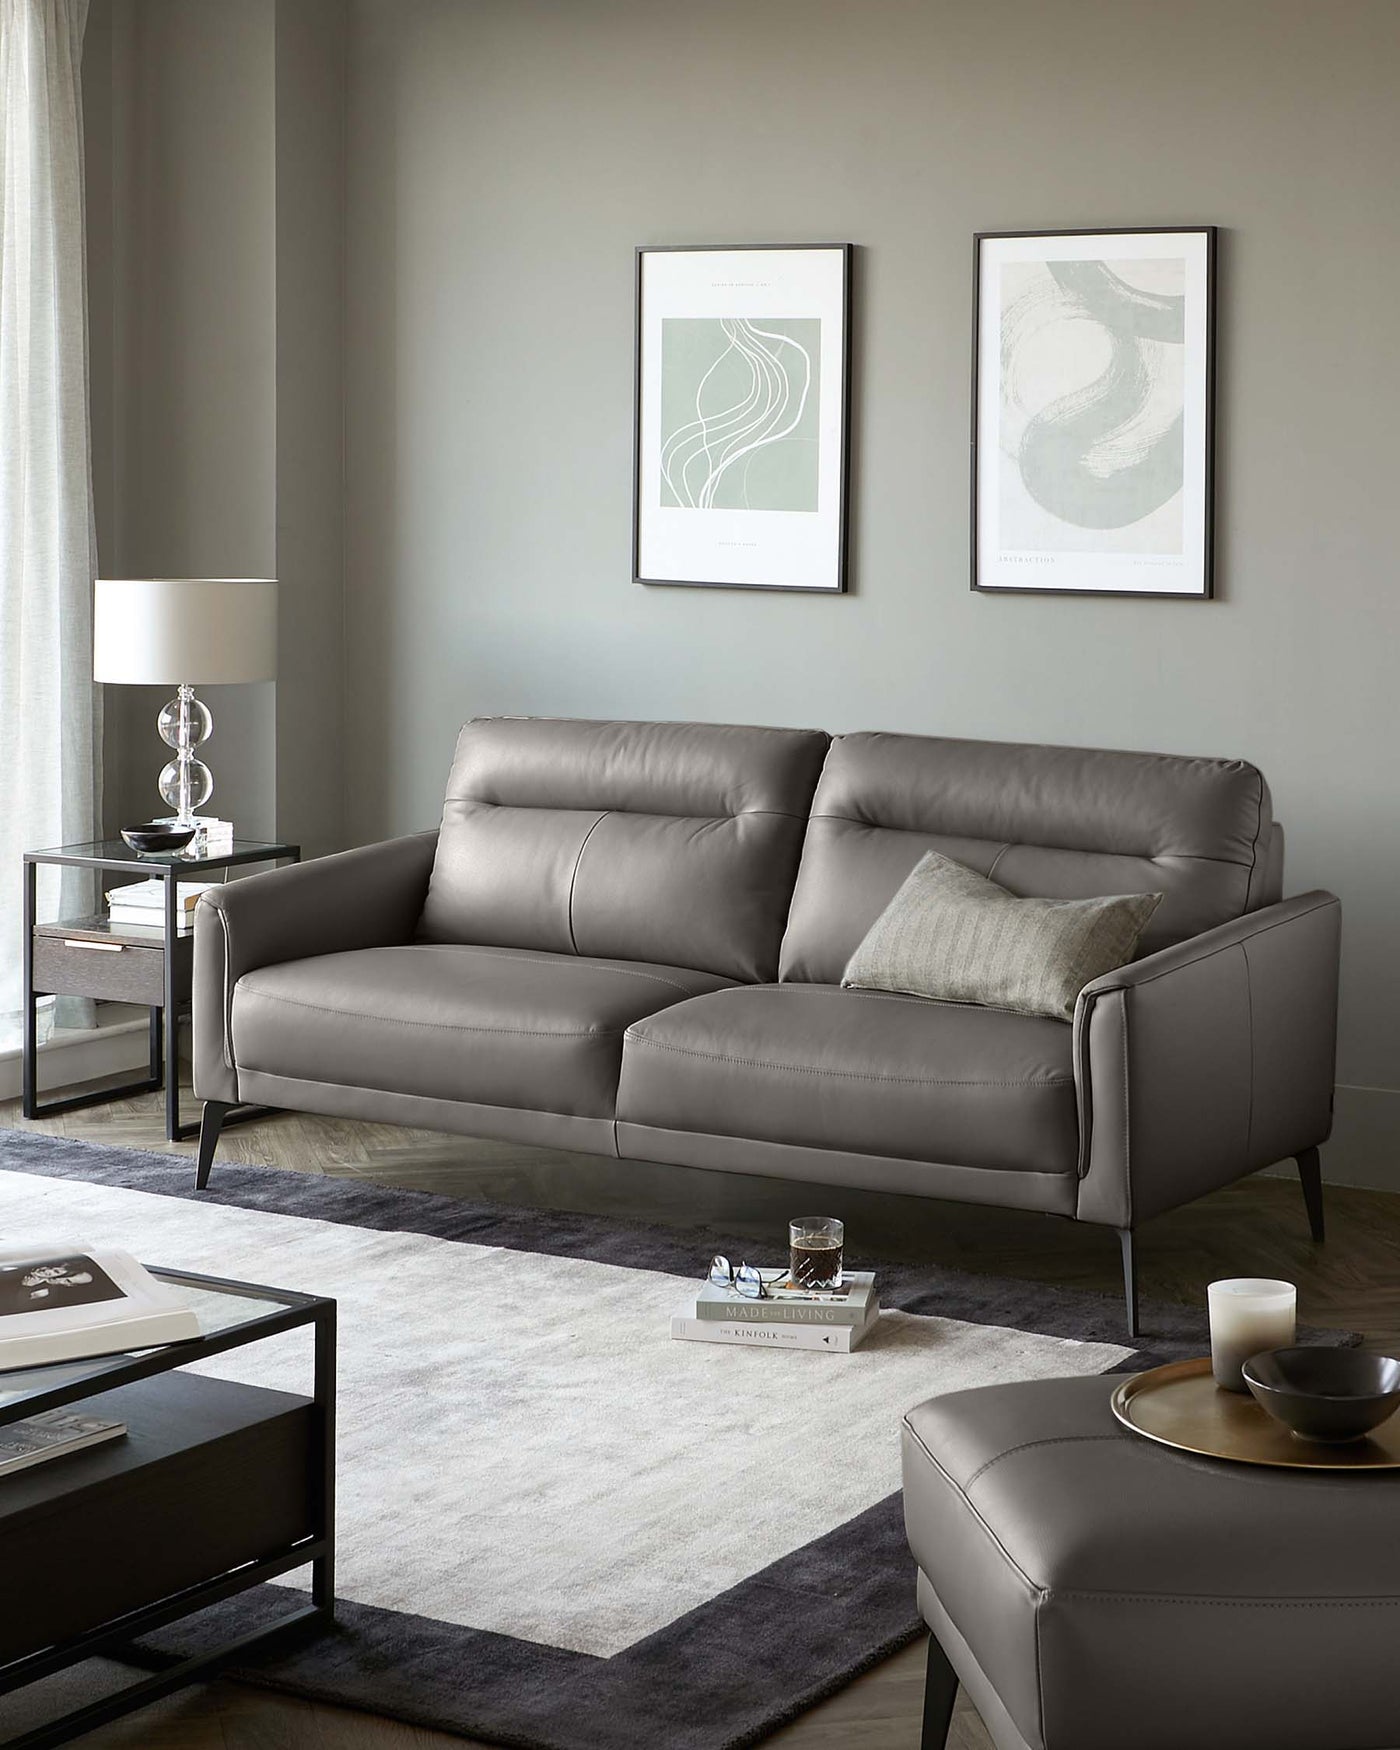 Modern living room setup featuring a sleek grey leather sofa with clean lines and minimalist design, accompanied by a matching leather ottoman acting as a coffee table. A pair of elegant side tables with glass tops and metallic frames flank the sofa, each holding a stylish table lamp. The furniture ensemble rests atop a large two-tone area rug, which adds warmth and texture to the space.